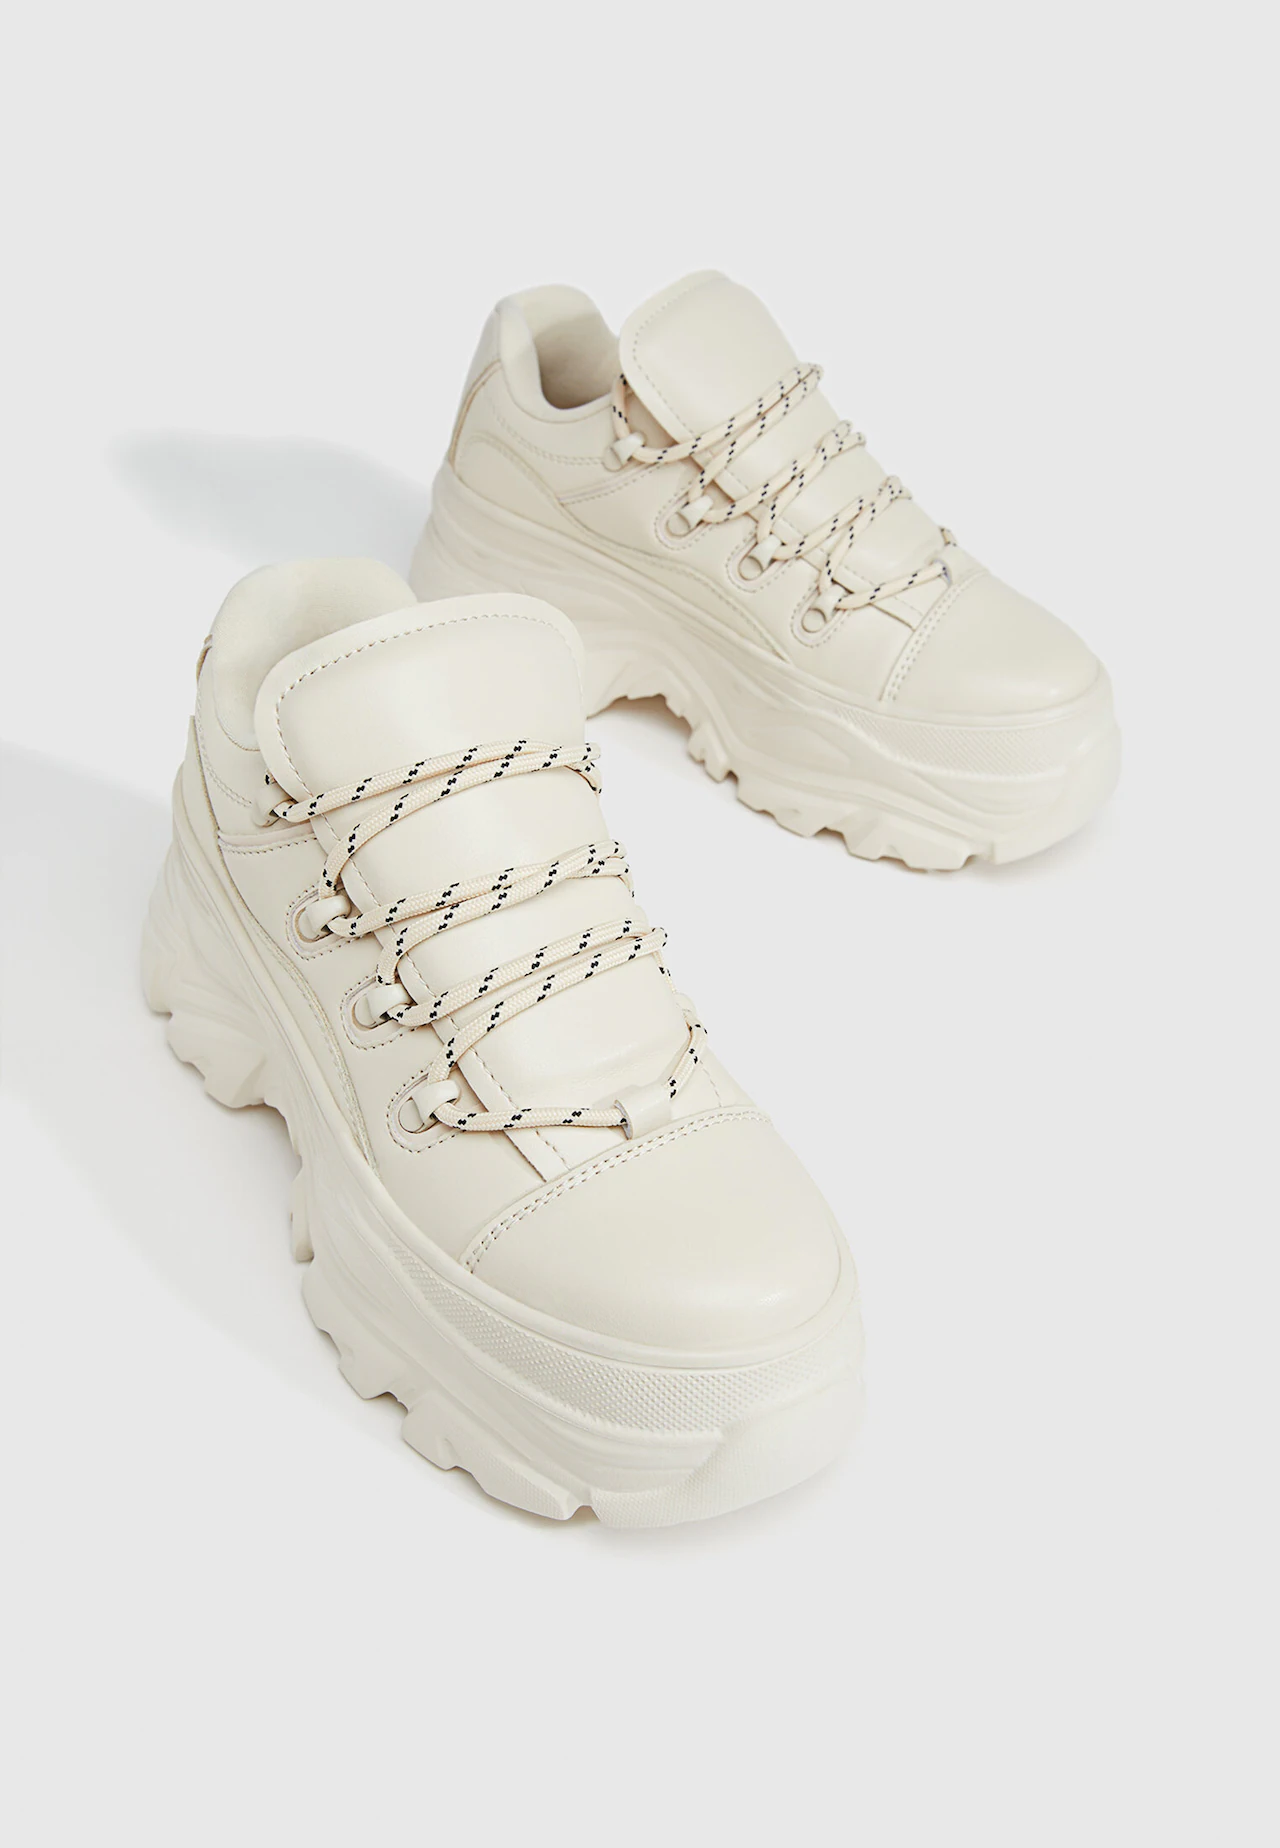 Stradivarius Sporty Dad Sneakers in White and Burgundy